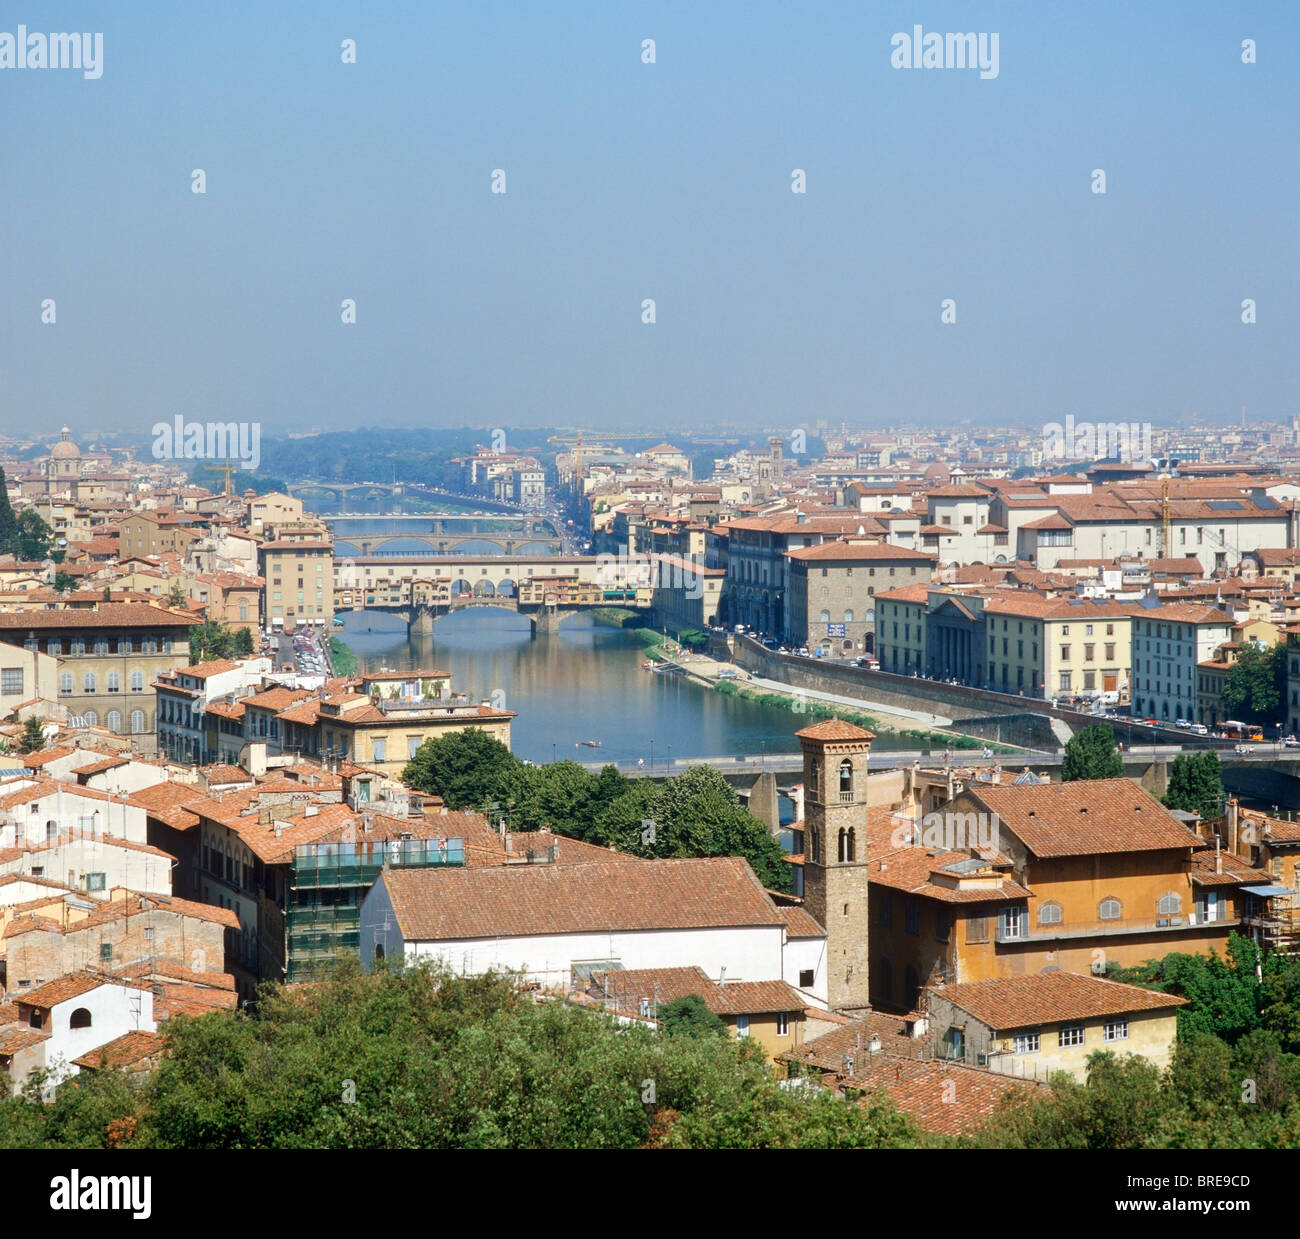 View of the Ponte Vecchio and the River Arno from Piazzale Michelangelo, Florence, Tuscany, Italy Stock Photo